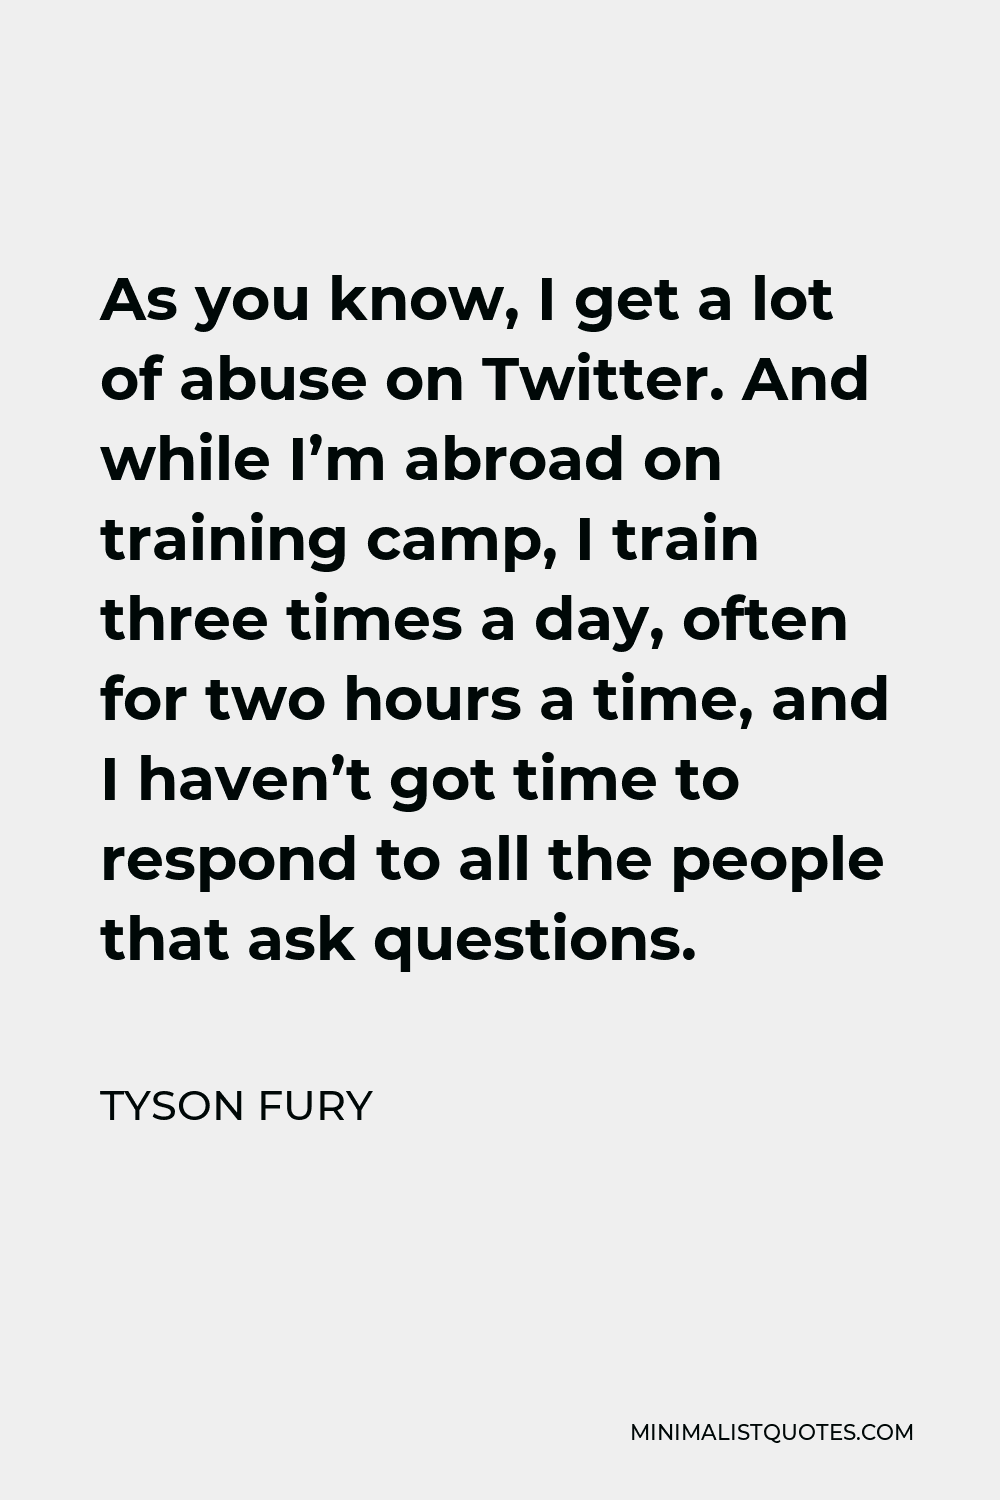 Tyson Fury Quote - As you know, I get a lot of abuse on Twitter. And while I’m abroad on training camp, I train three times a day, often for two hours a time, and I haven’t got time to respond to all the people that ask questions.